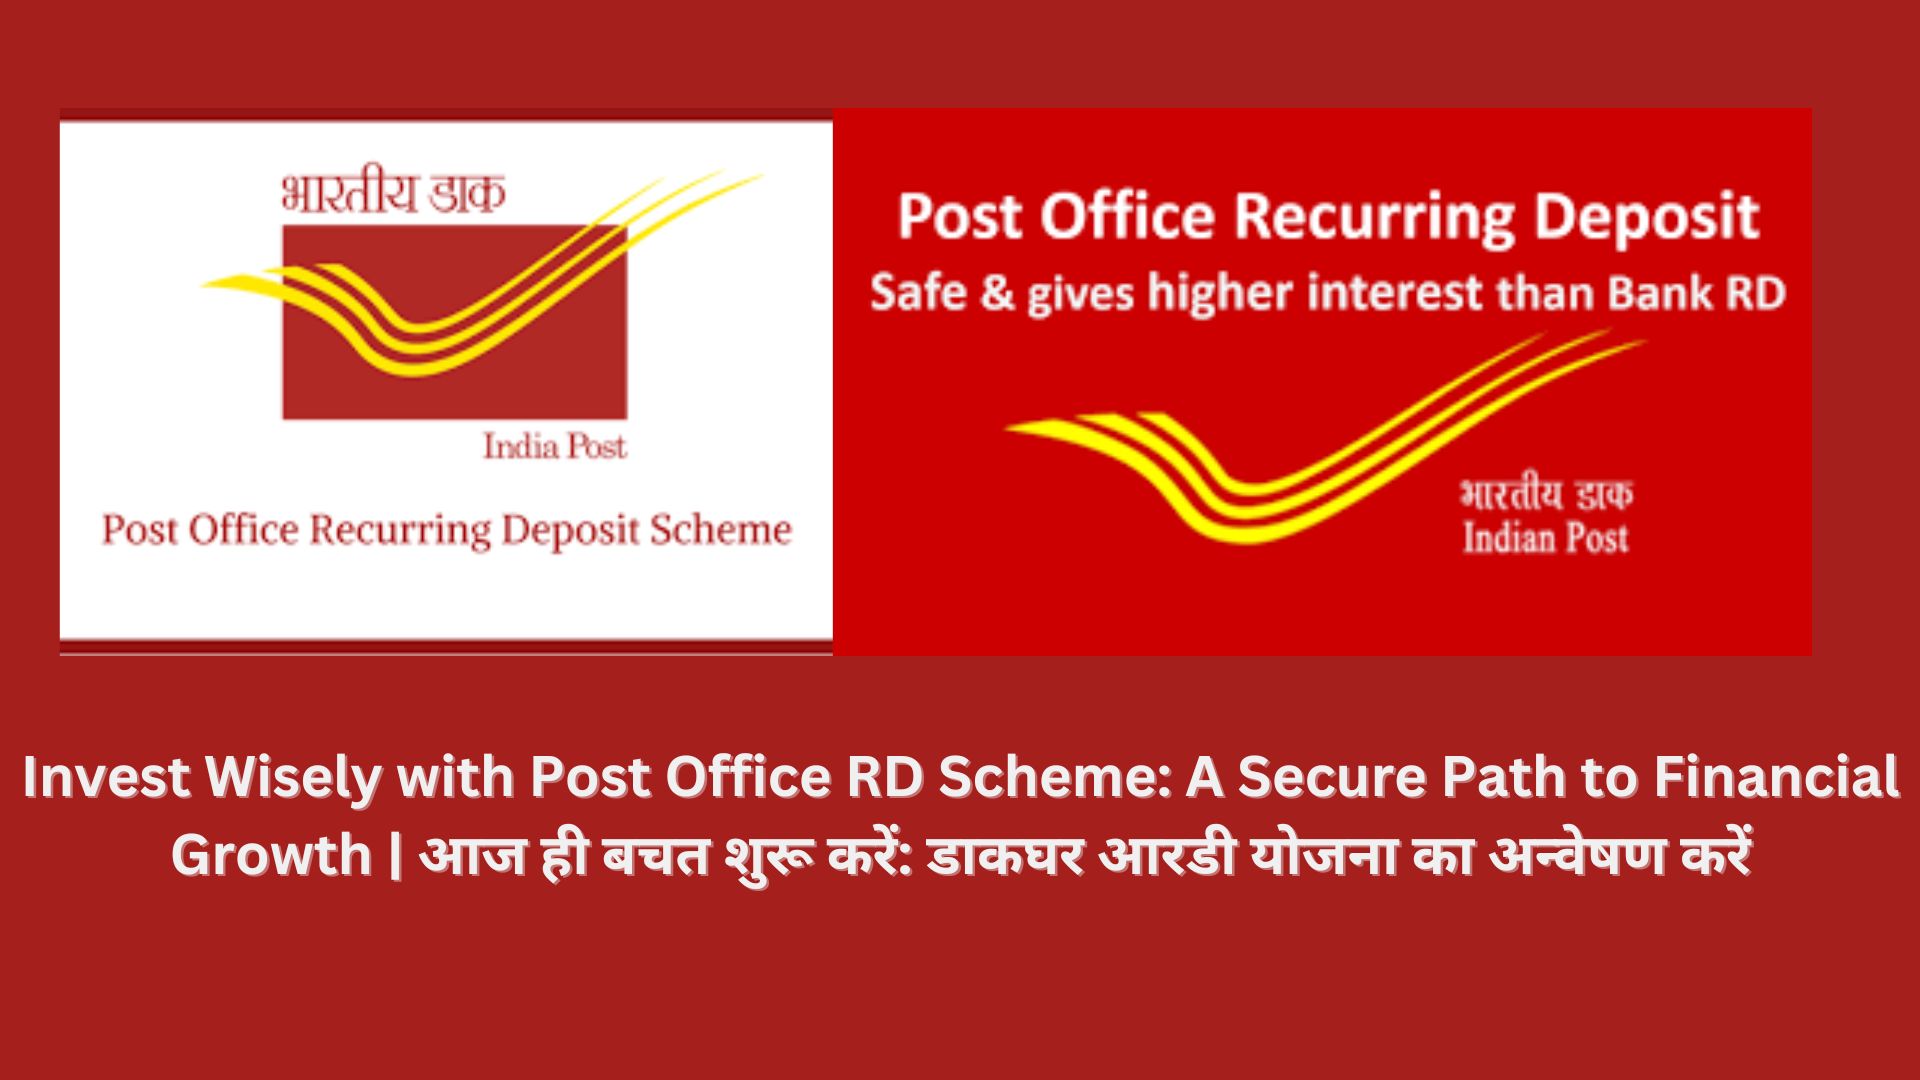 Invest Wisely with Post Office RD Scheme: A Secure Path to Financial Growth | आज ही बचत शुरू करें: डाकघर आरडी योजना का अन्वेषण करें